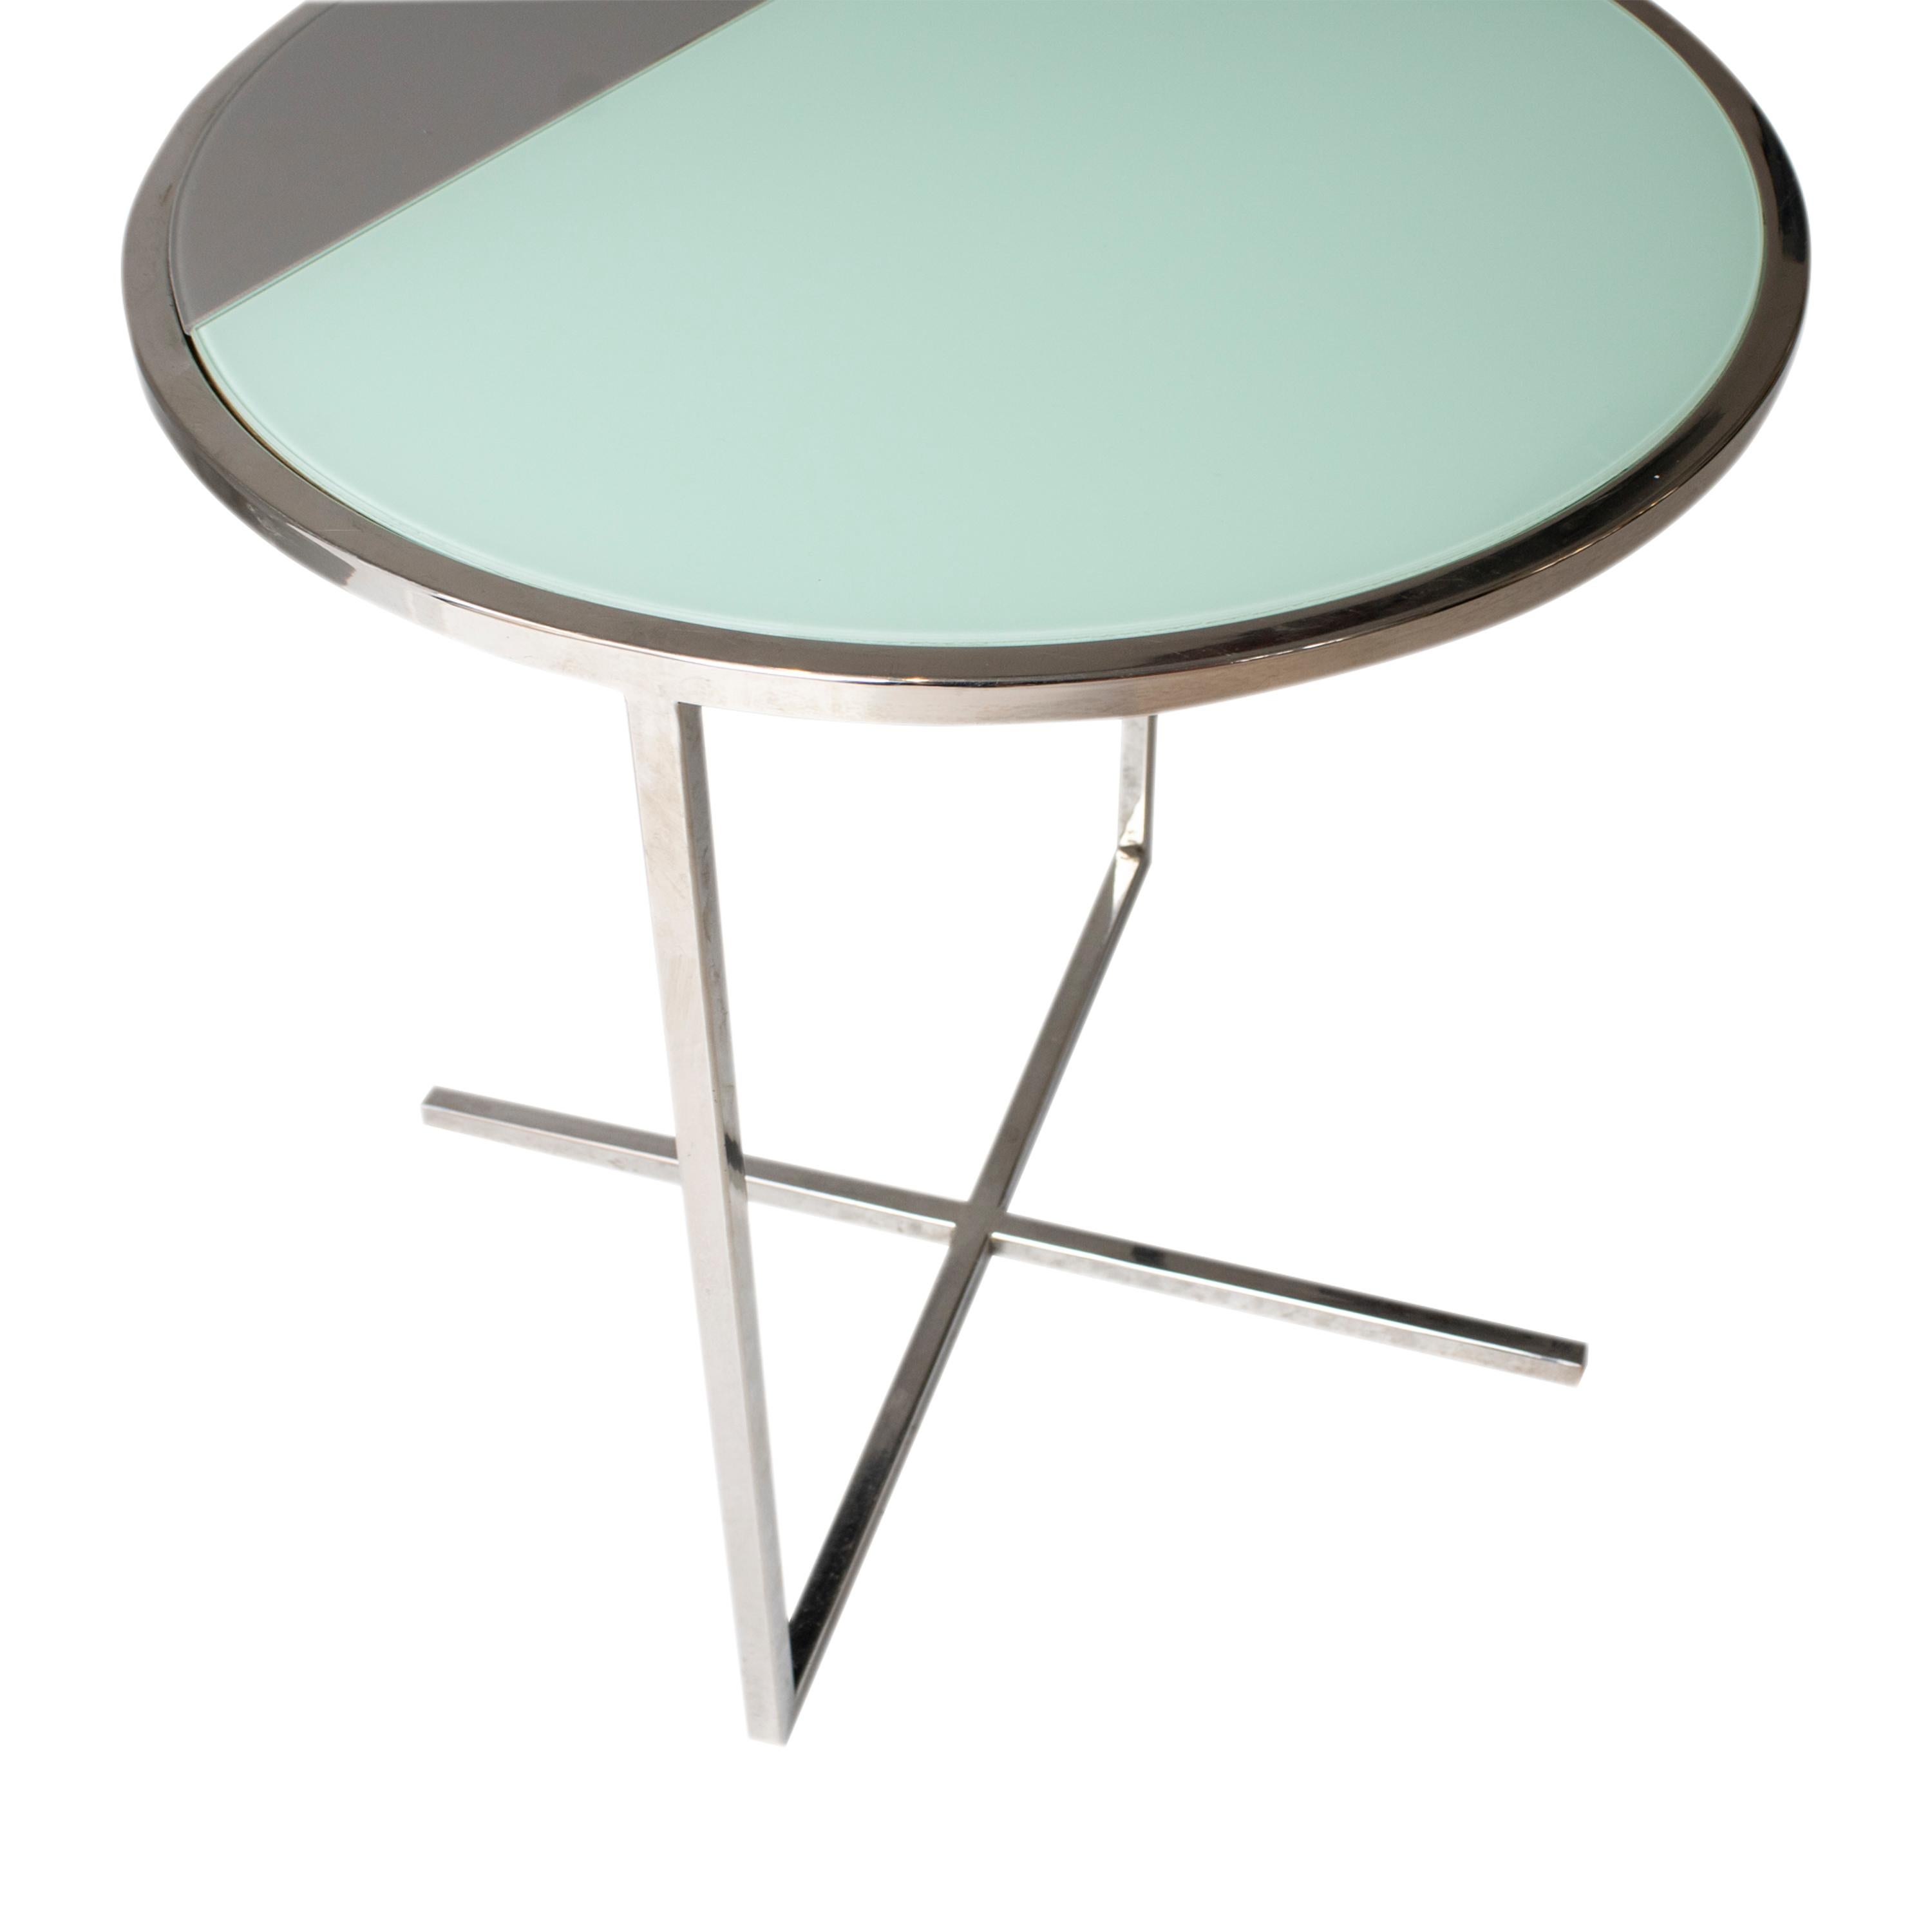 Spanish Contemporary Chromed Steel Green and Grey Glass Round Center Table, Italy, 1970